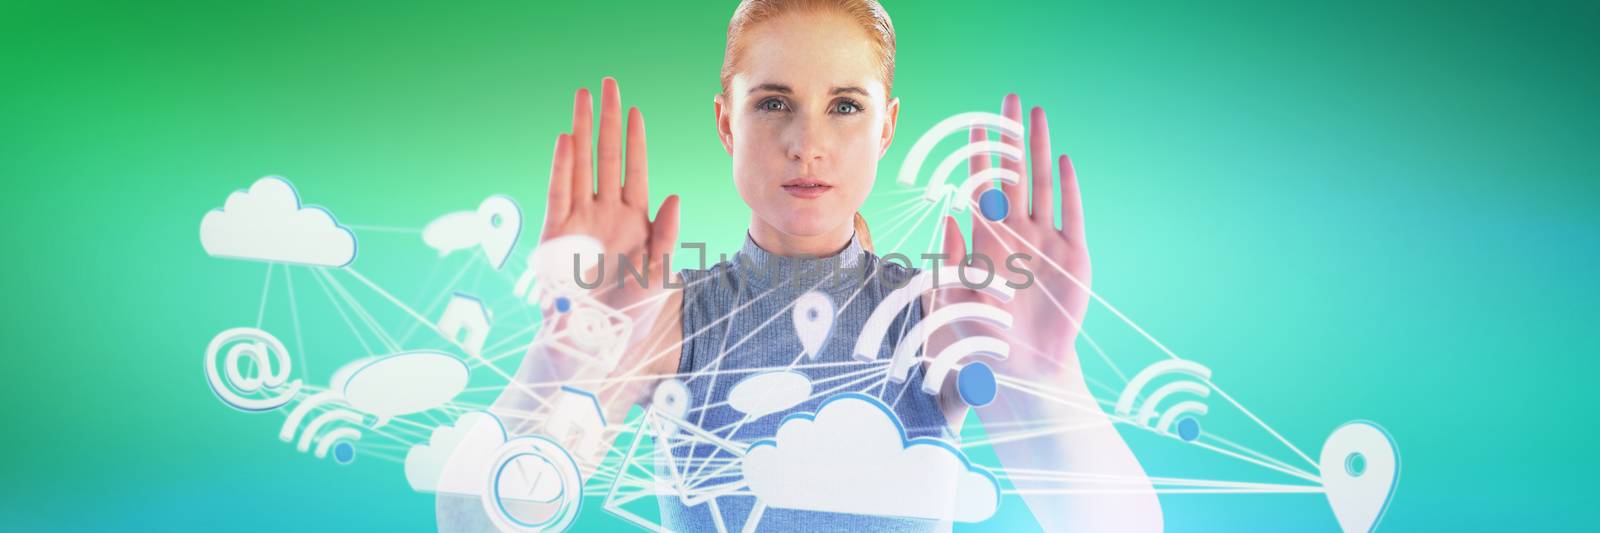 Portrait of serious businesswoman showing stop gesture against abstract green background